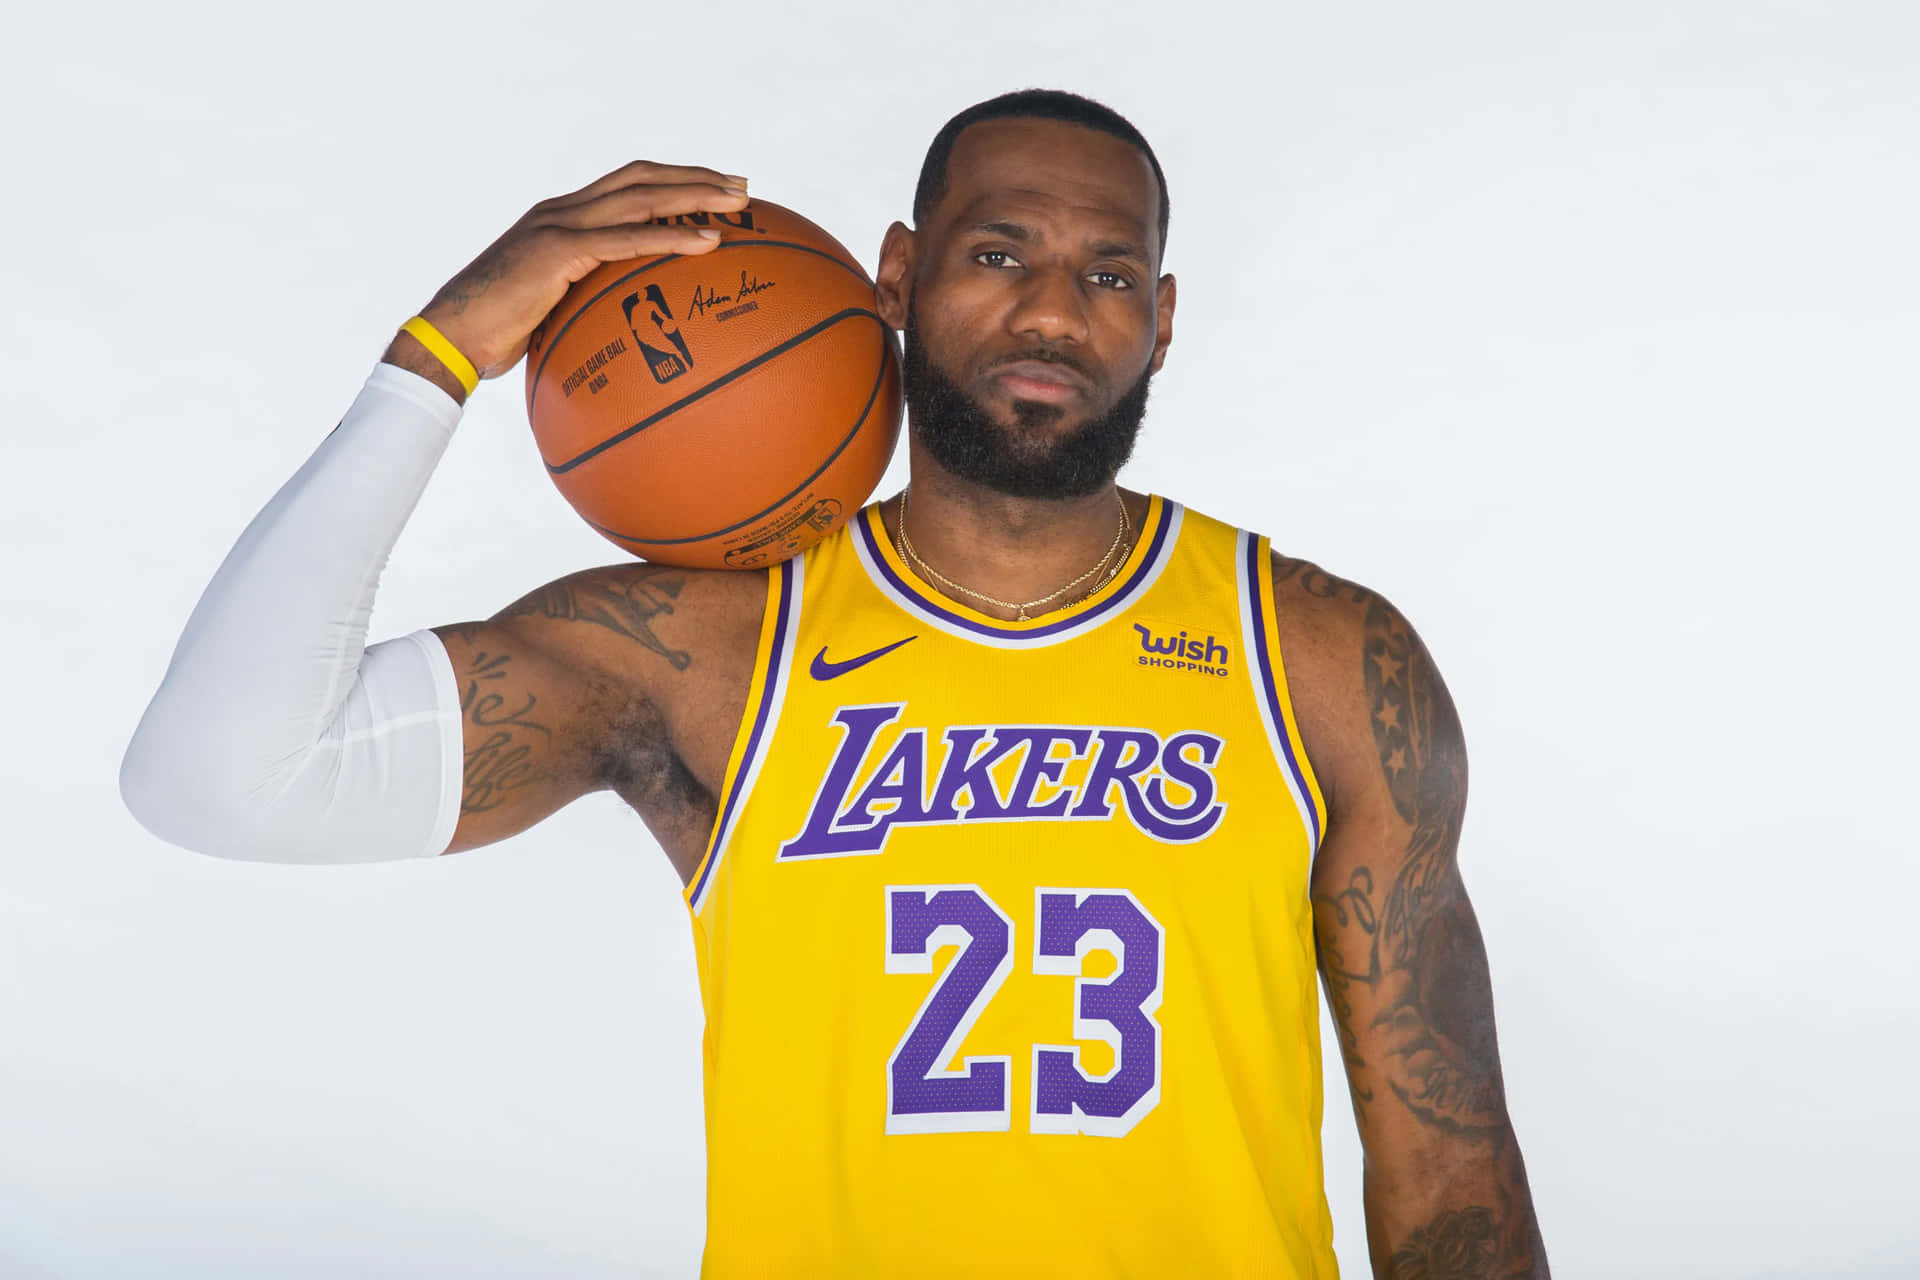 "Lebron James putting on a show for Los Angeles Lakers fans"